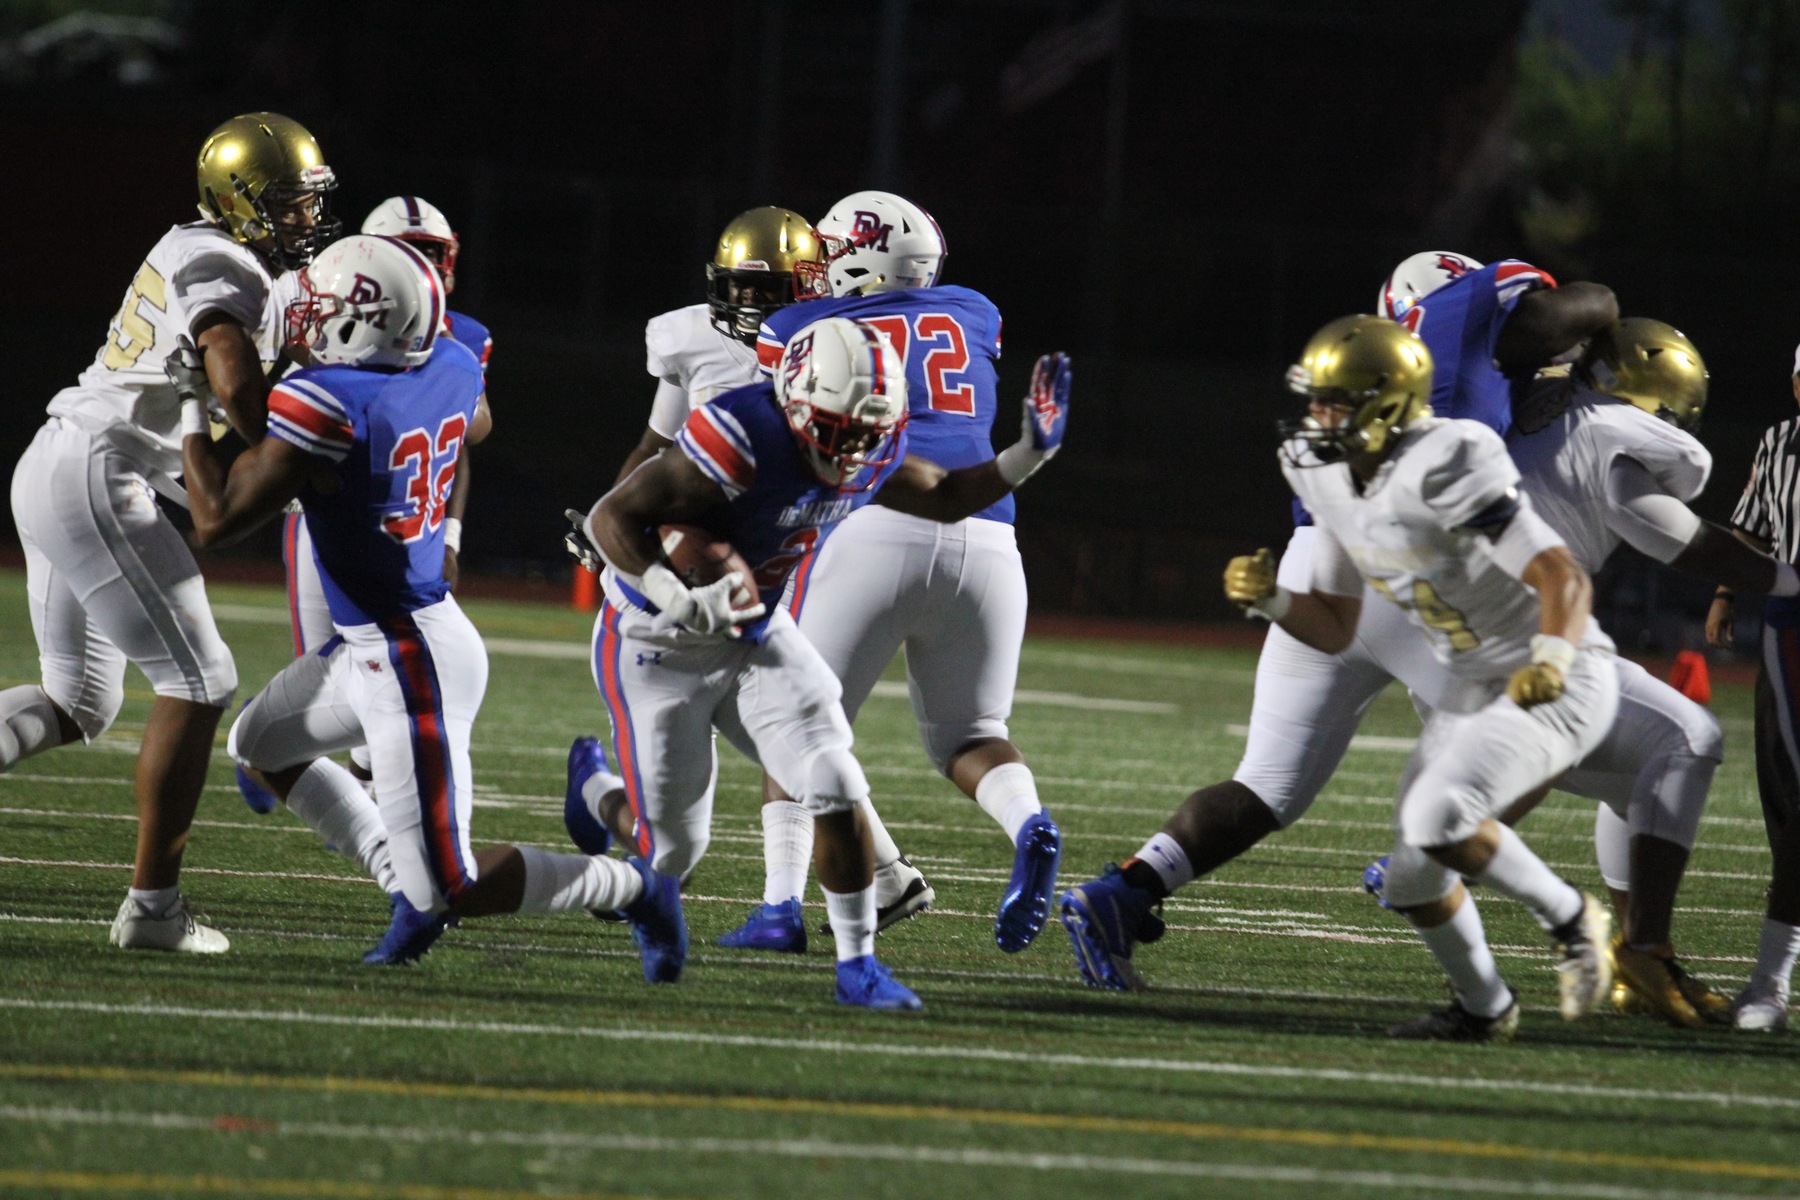 DeMatha Senior, MarShawn Lloyd and the offensive line continue to fuels the Stags offense. (Photo by Ed King)